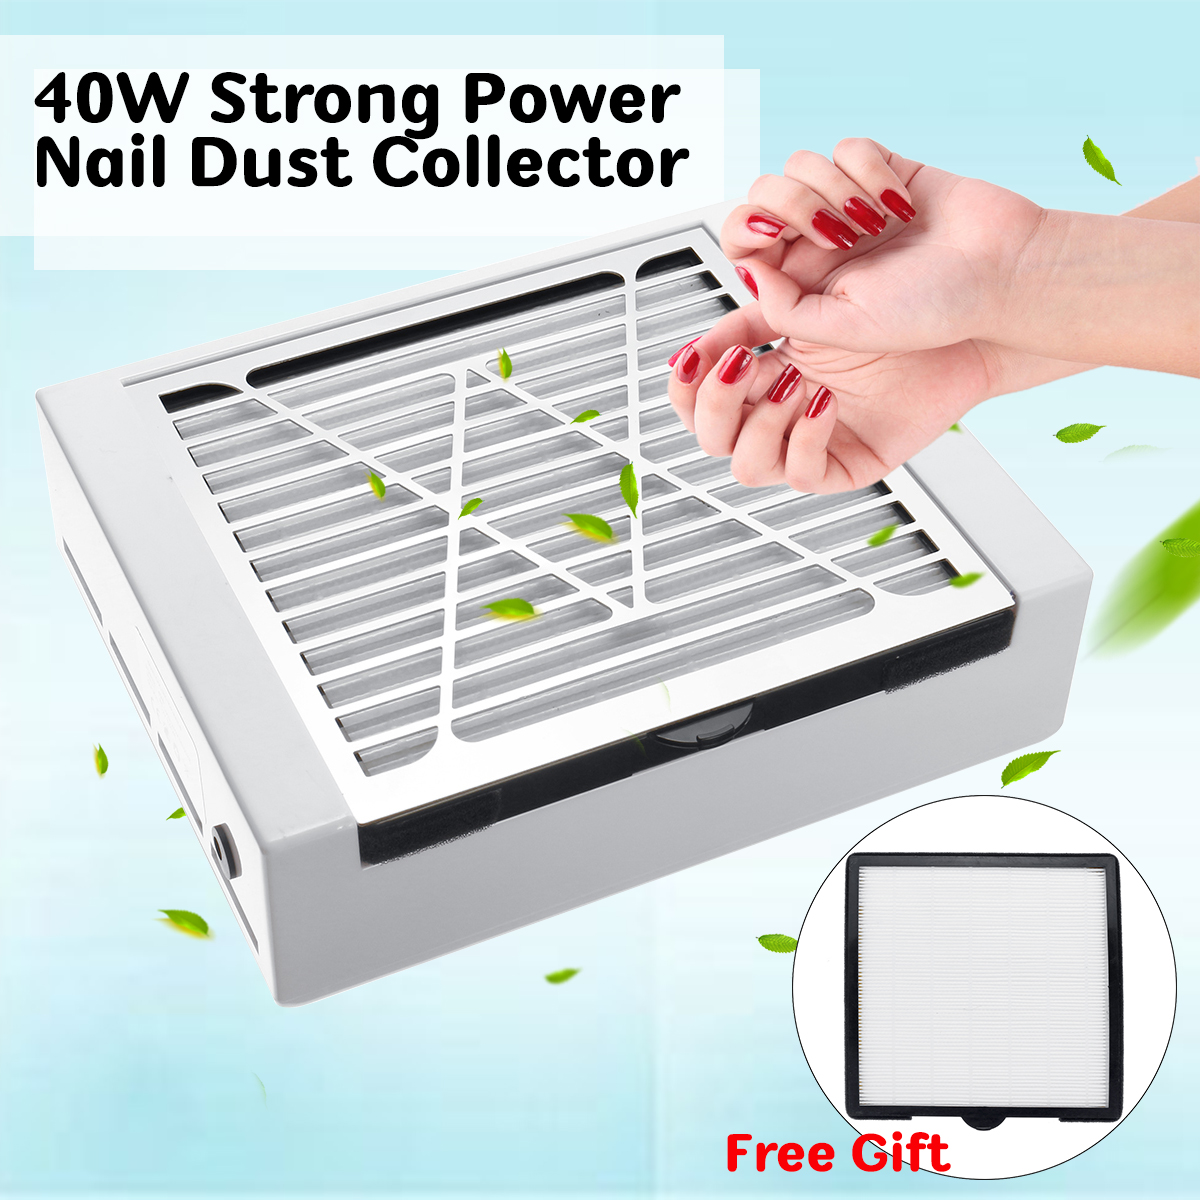 40W-Nail-Dust-Collector-Adjustable-Speed-Nails-Art-Machine-Vacuum-Cleaner-Tools-1497639-2